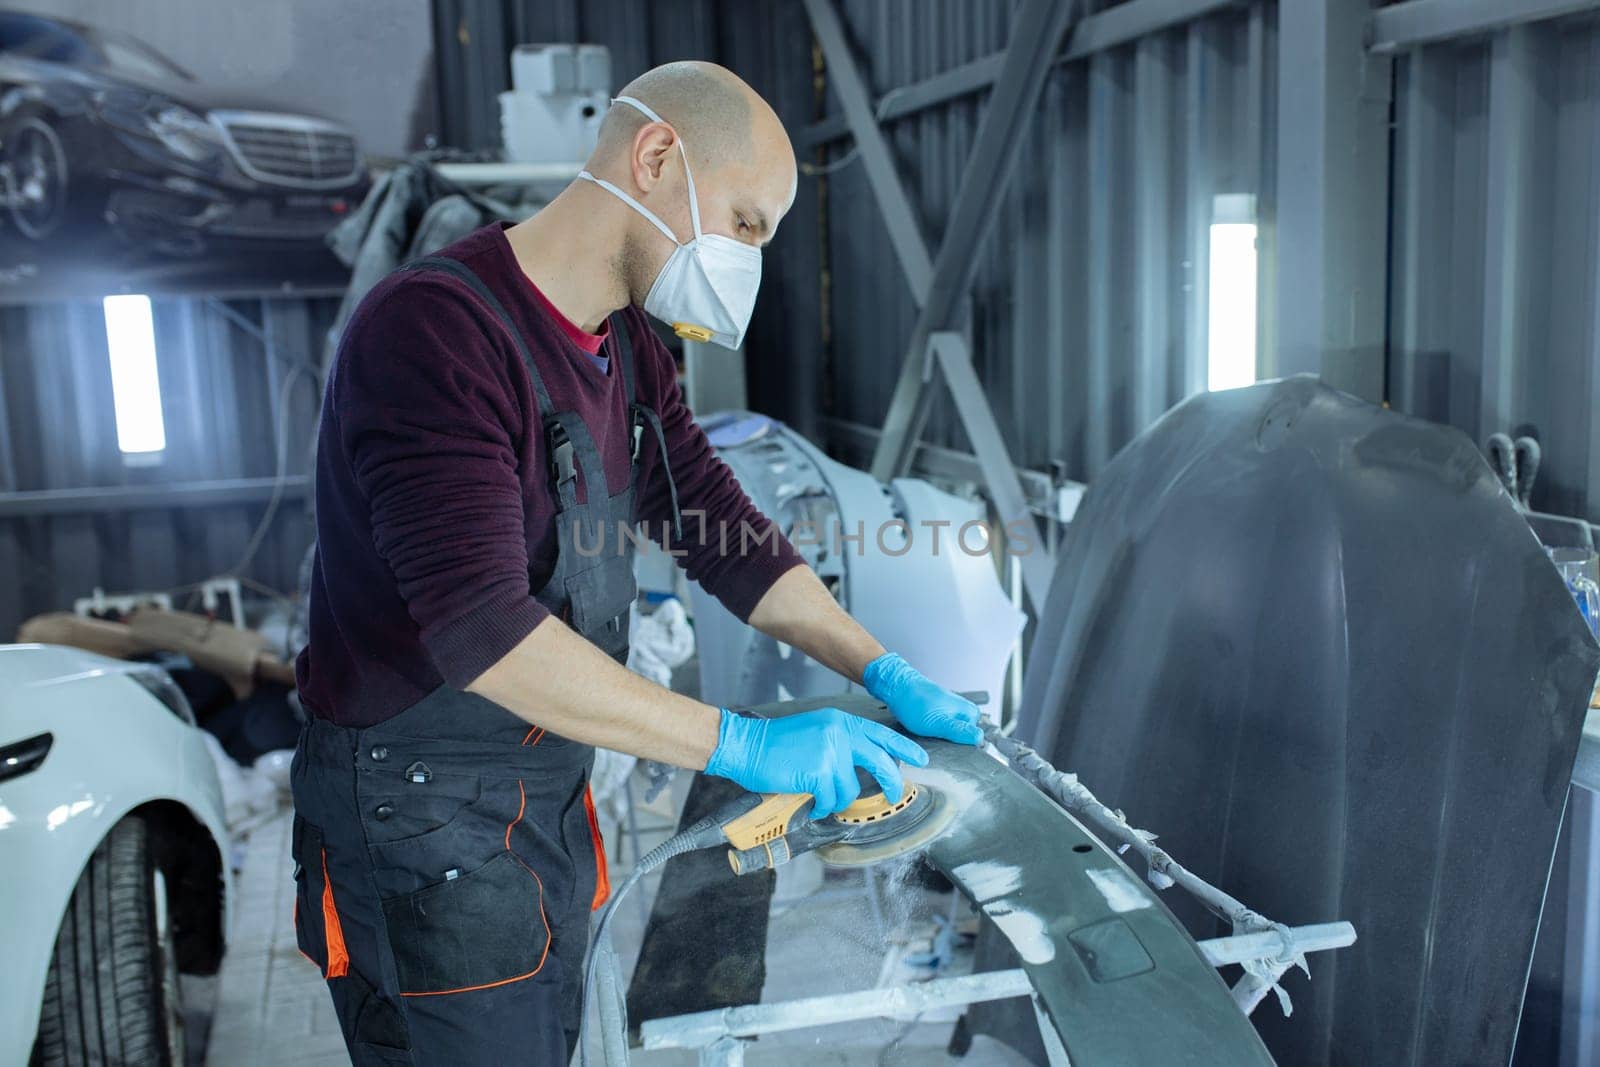 Sanding a car body part with electrical grinder machine before painting, vehicle body repair service